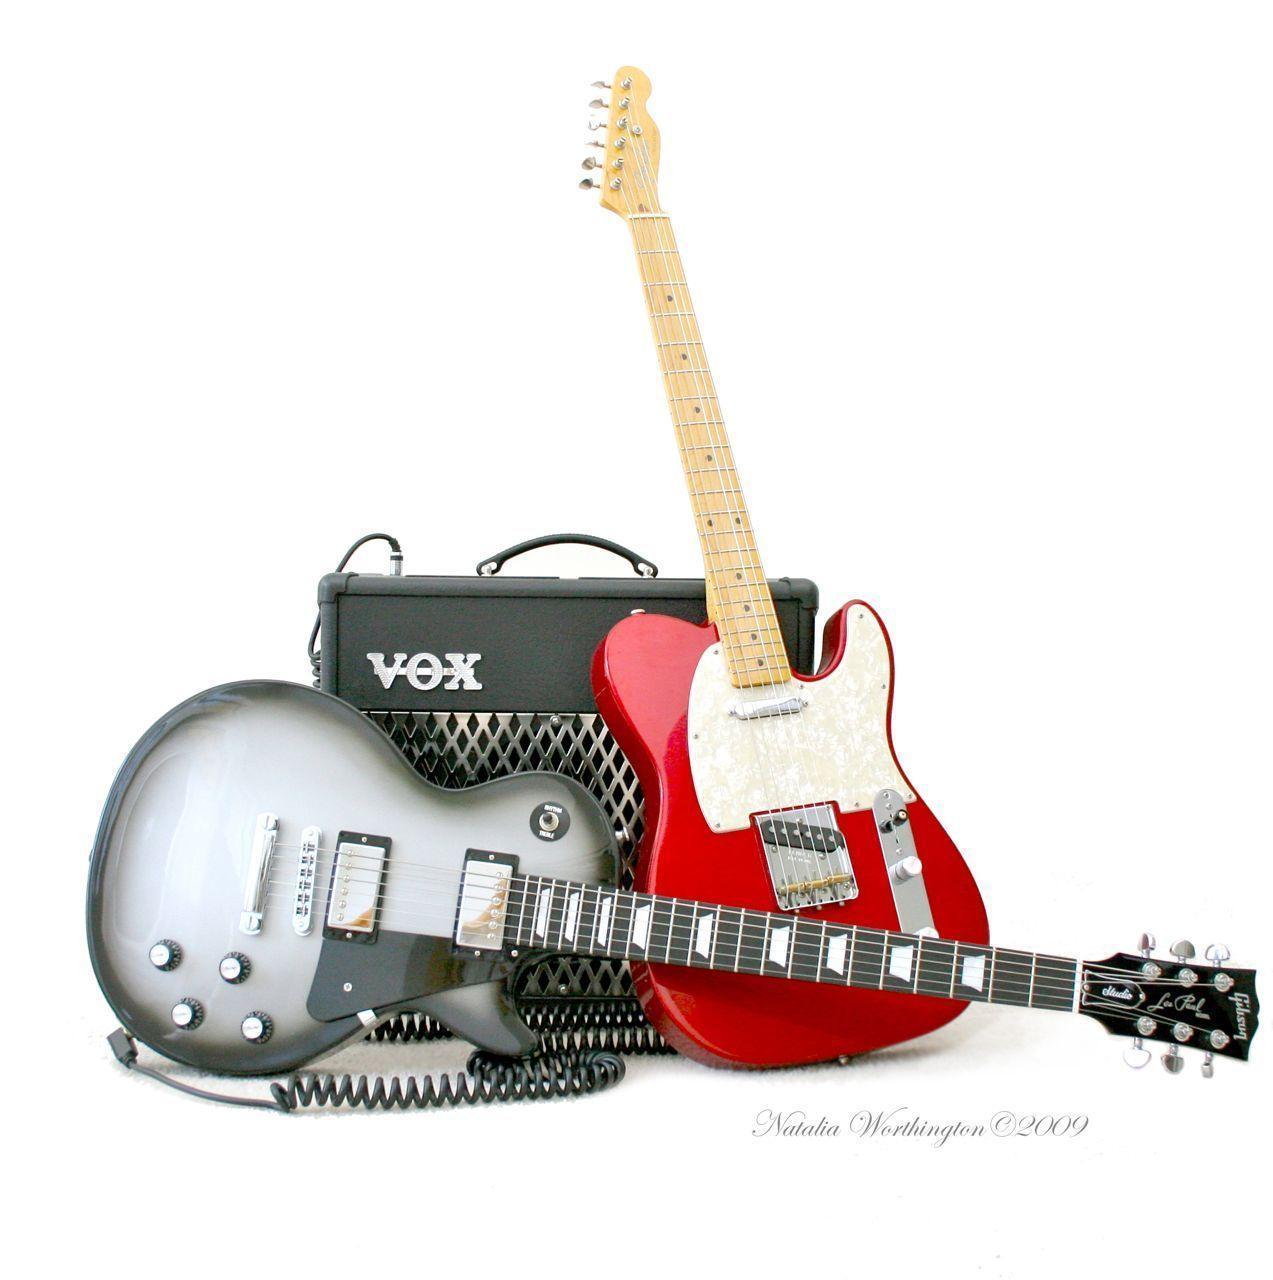 Telecaster Guitar Photo Gallery is in the Air